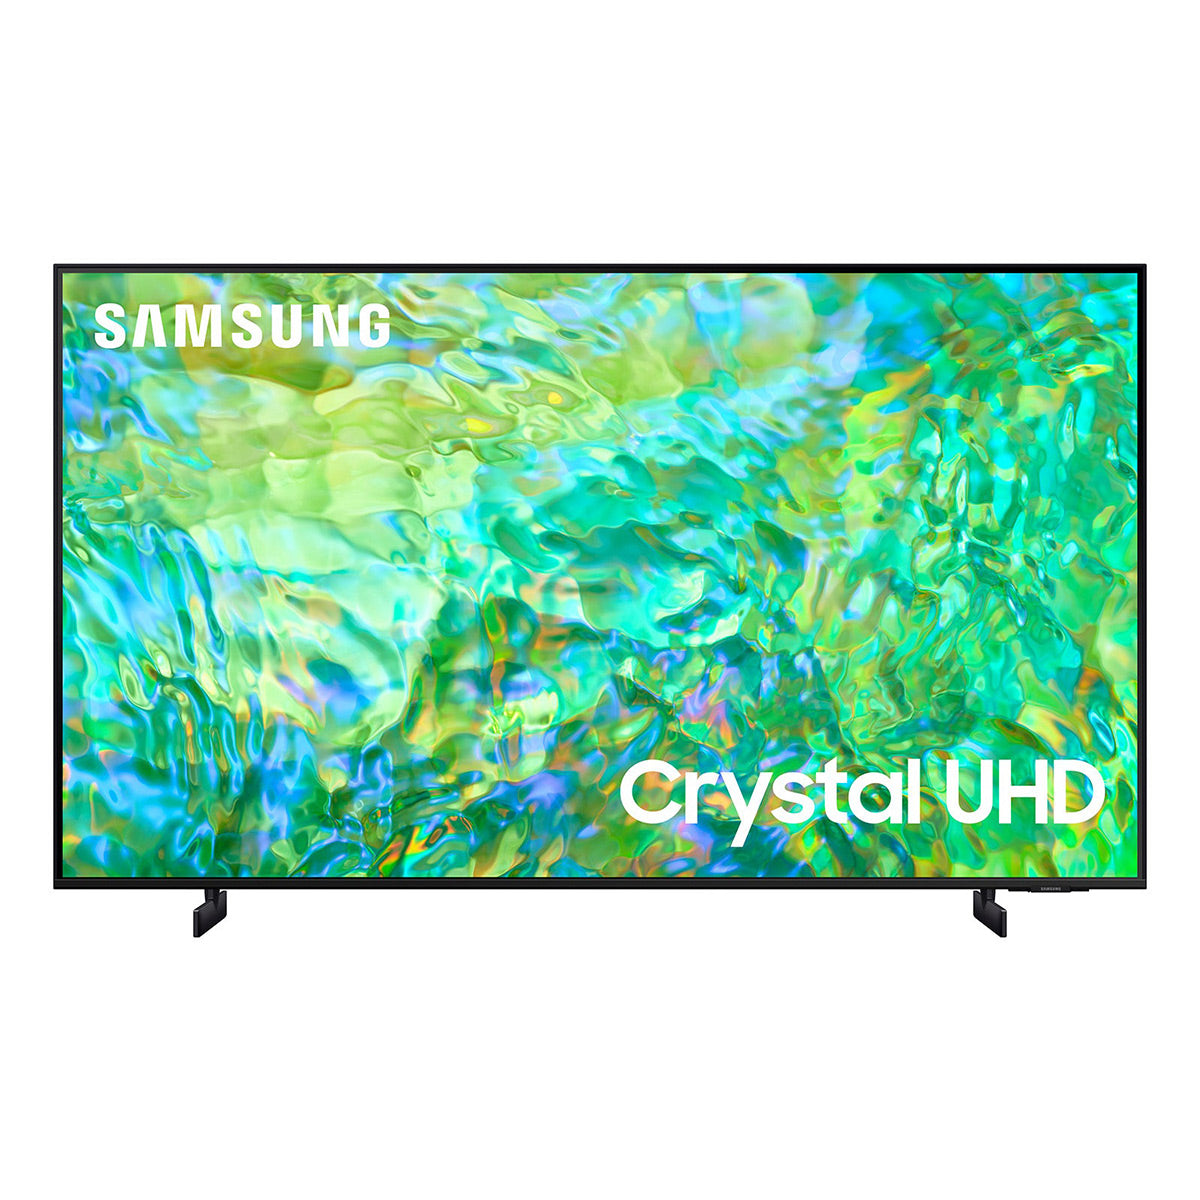 Samsung UN43CU8000 43" Crystal UHD 4K Smart TV with HDR, Object Tracking Sound Lite, & 4K Upscaling (2023)